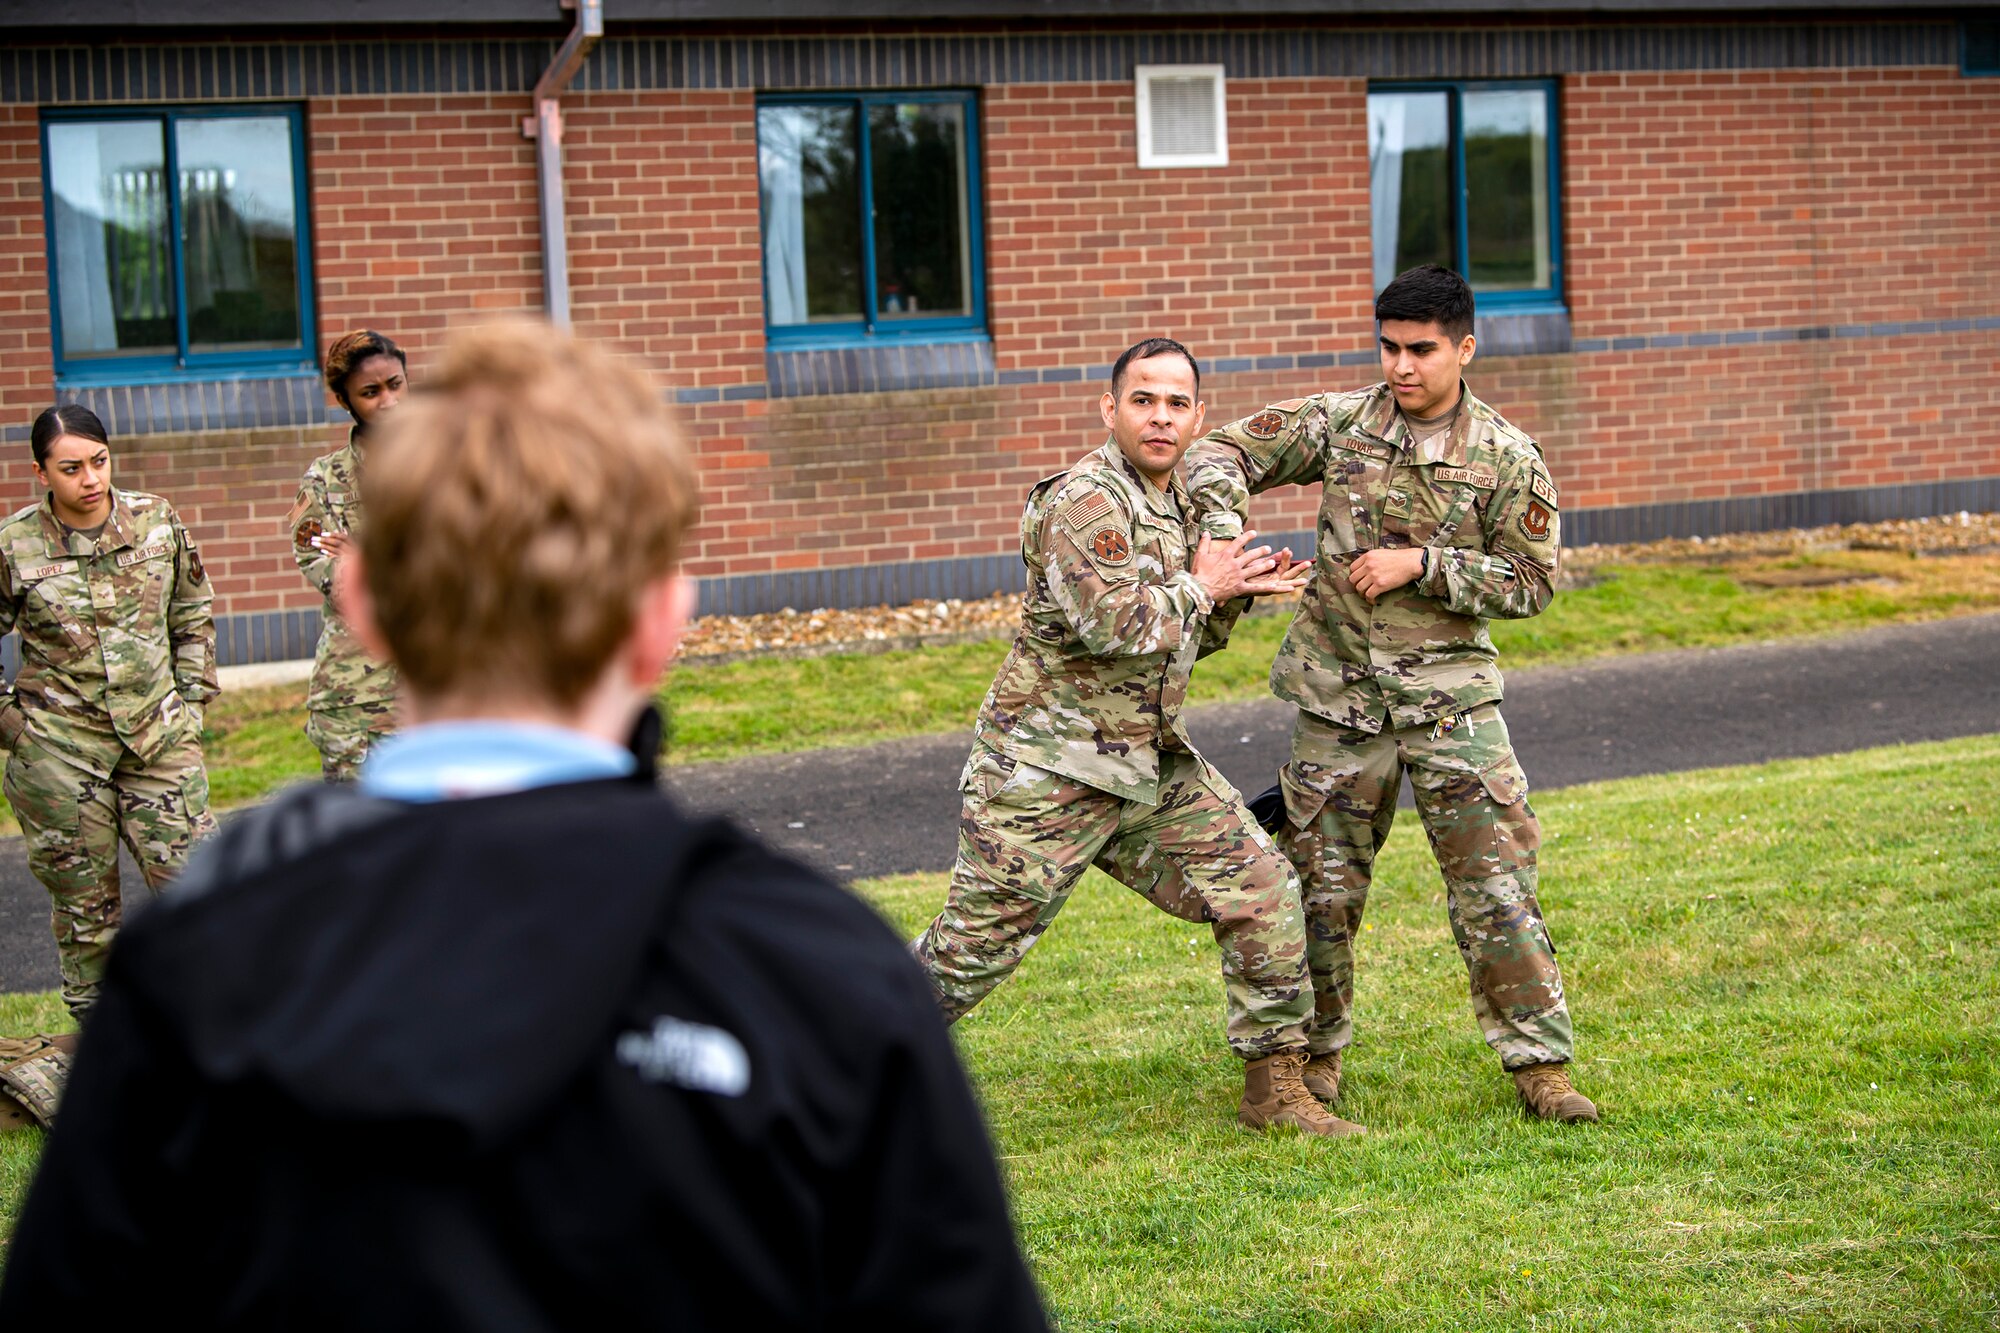 Master Sgt. Christian Navarro Salazar, center left, 423d Security Forces Squadron logistics and readiness section chief, demonstrates self defense techniques at RAF Molesworth, England, May 10, 2022. The 423d SFS taught students from Huntingdon’s St. Peter’s school about weapons safety and self defense techniques as part of a mentorship program aimed at strengthening the relationship between the 501st Combat Support Wing and local community. (U.S. Air Force photo by Staff Sgt. Eugene Oliver)